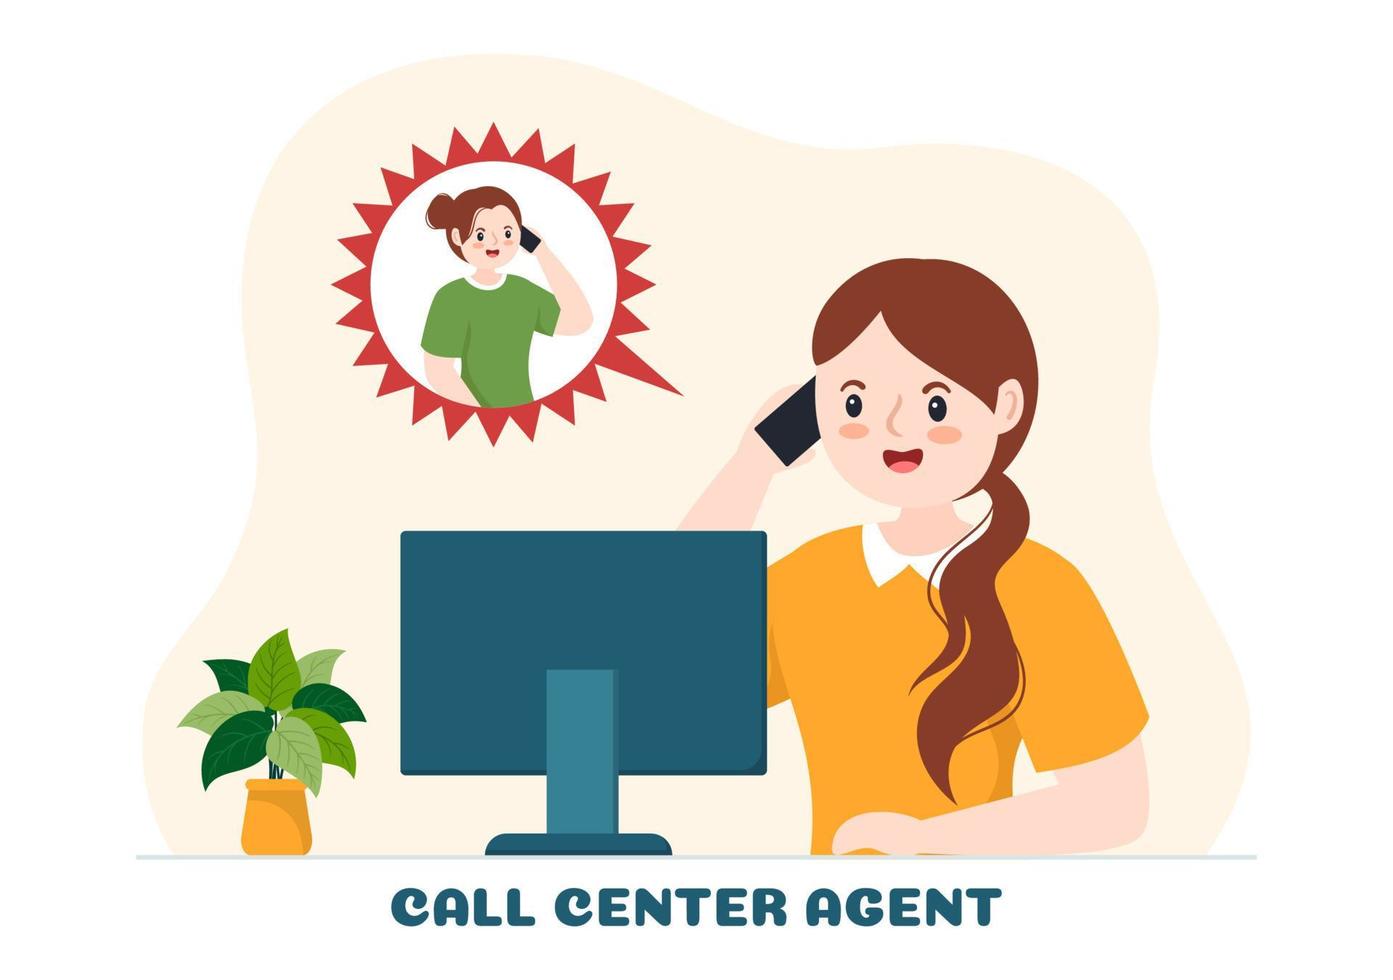 Call Center Agent of Customer Service or Hotline Operator with Headsets and Computers in Flat Cartoon Hand Drawn Templates Illustration vector